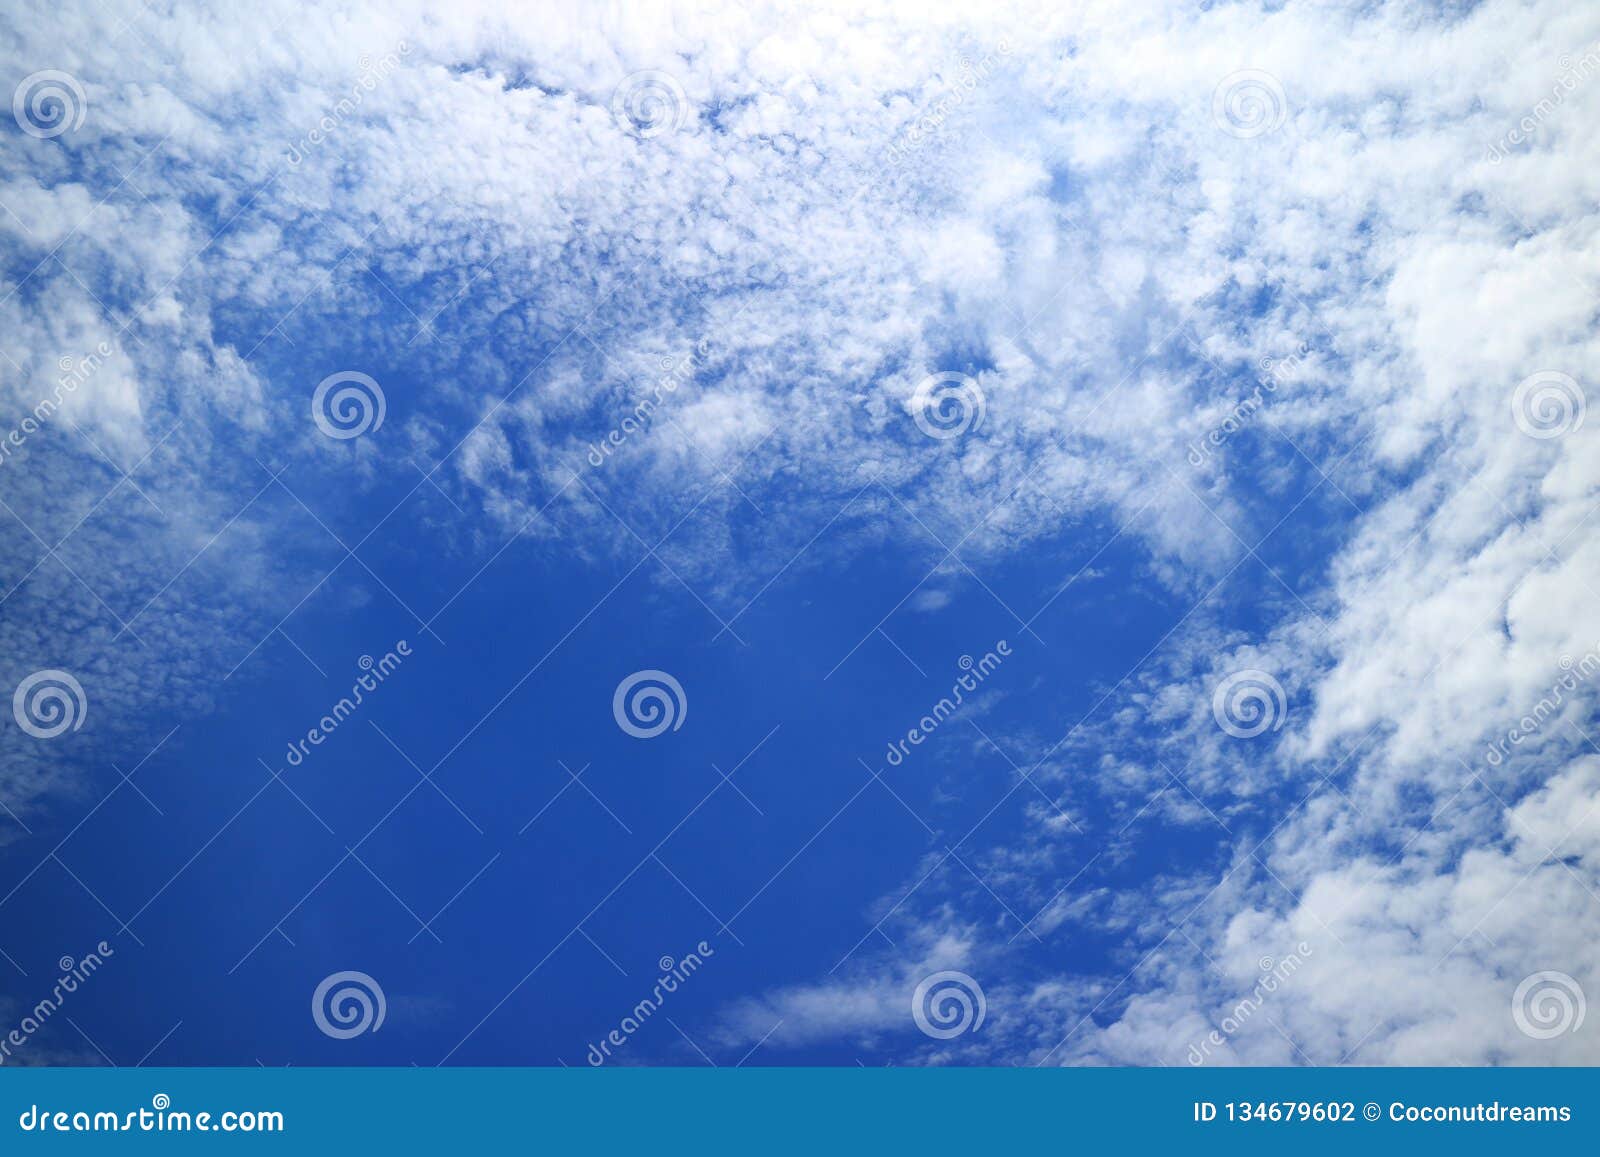 Vivid Blue Sunny Sky with Pure White Clouds Stock Photo - Image of ...